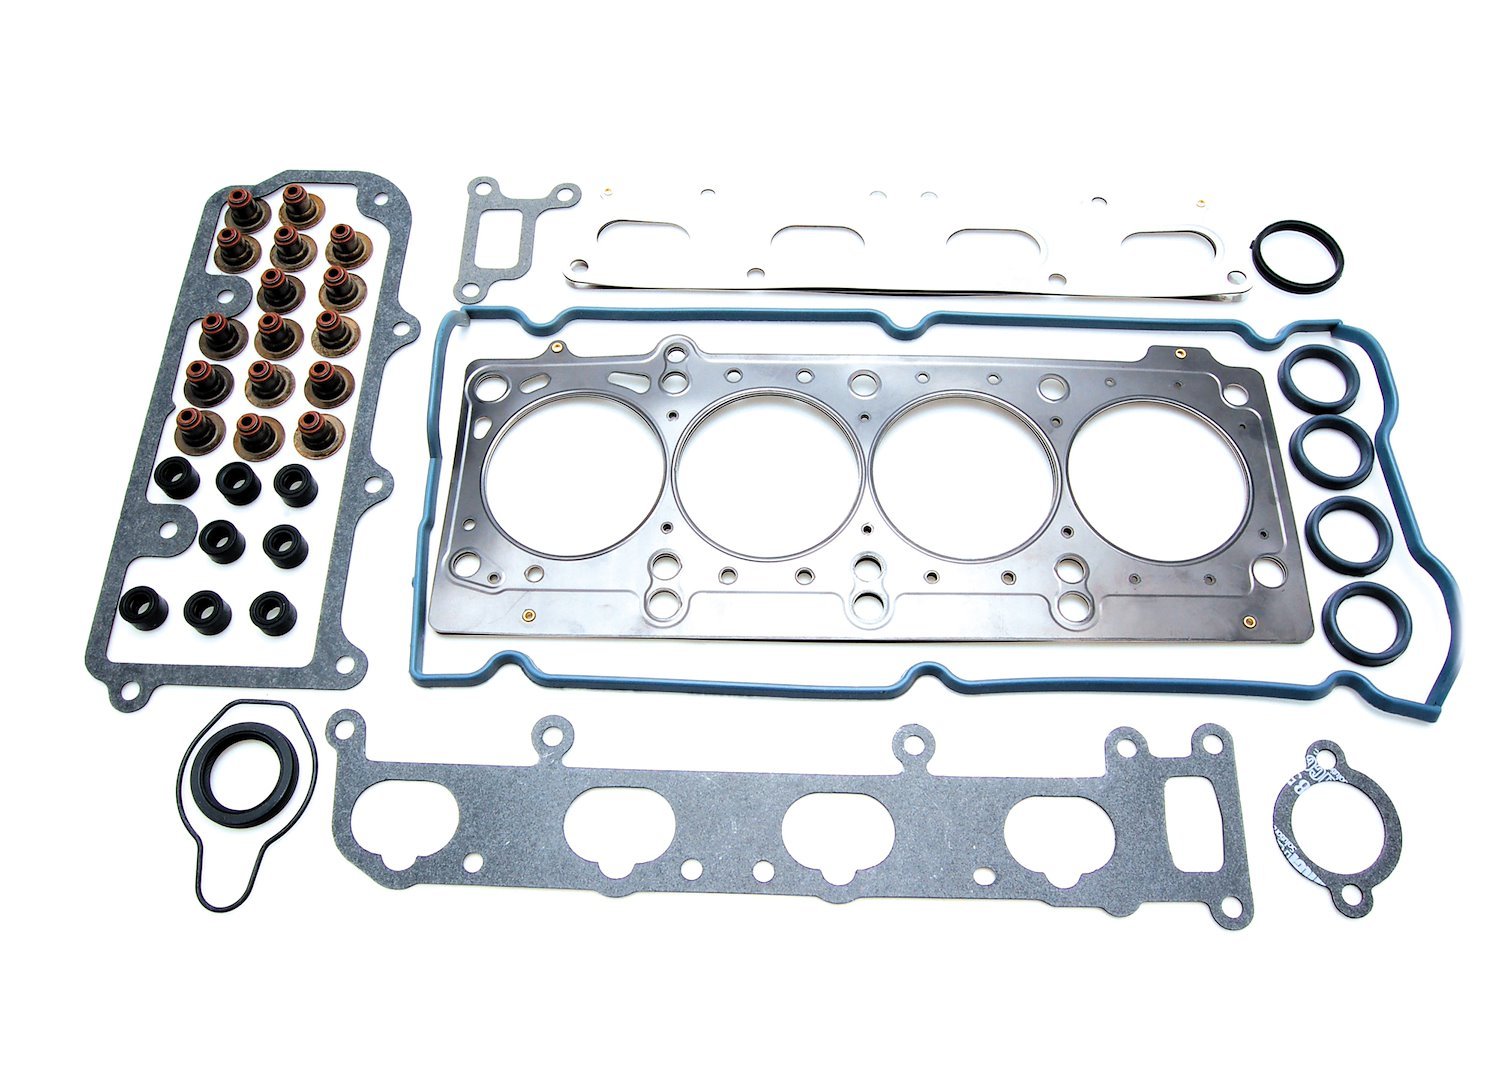 Top End Street Pro Gasket Kit for 1996-1999 Mitsubishi Eclipse with Chrysler 420A/ECC Engine